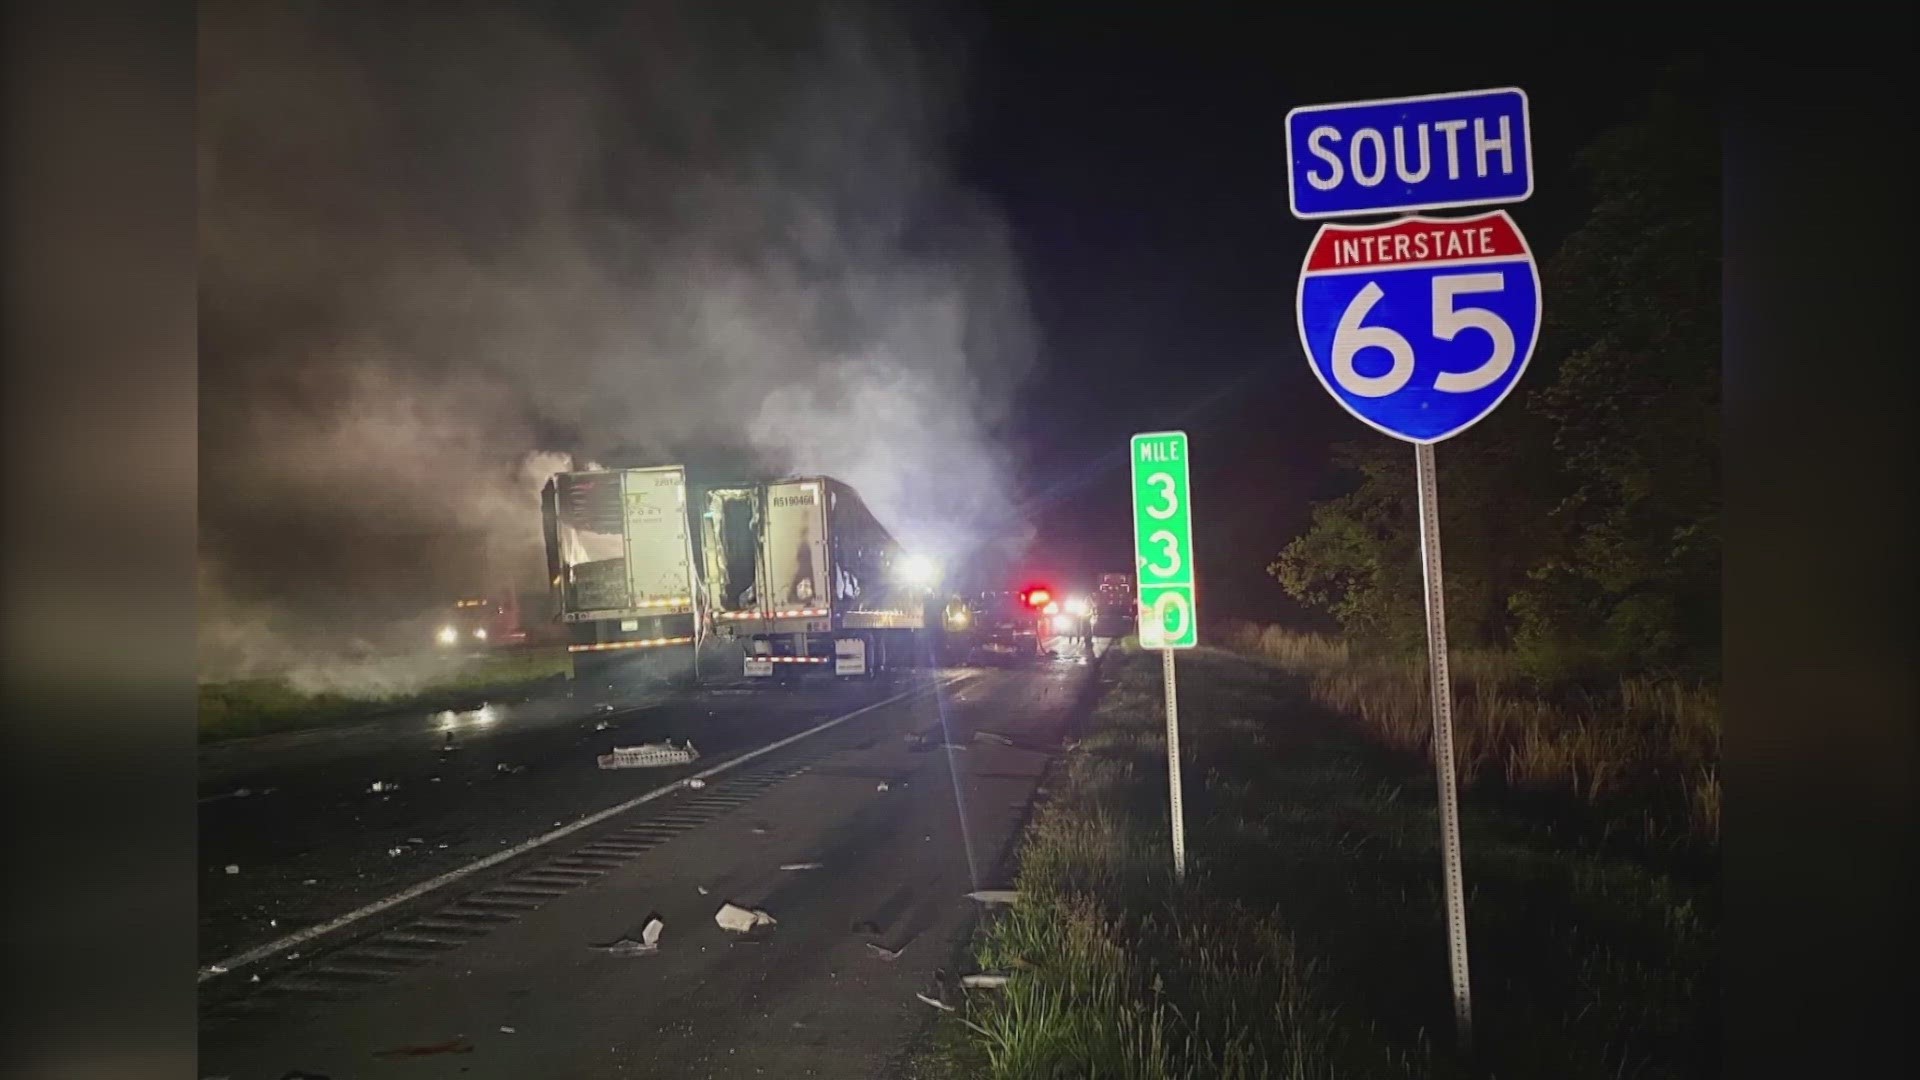 I-65 South has reopened after a nearly 12-hour closure due to a crash involving three semi-trucks.